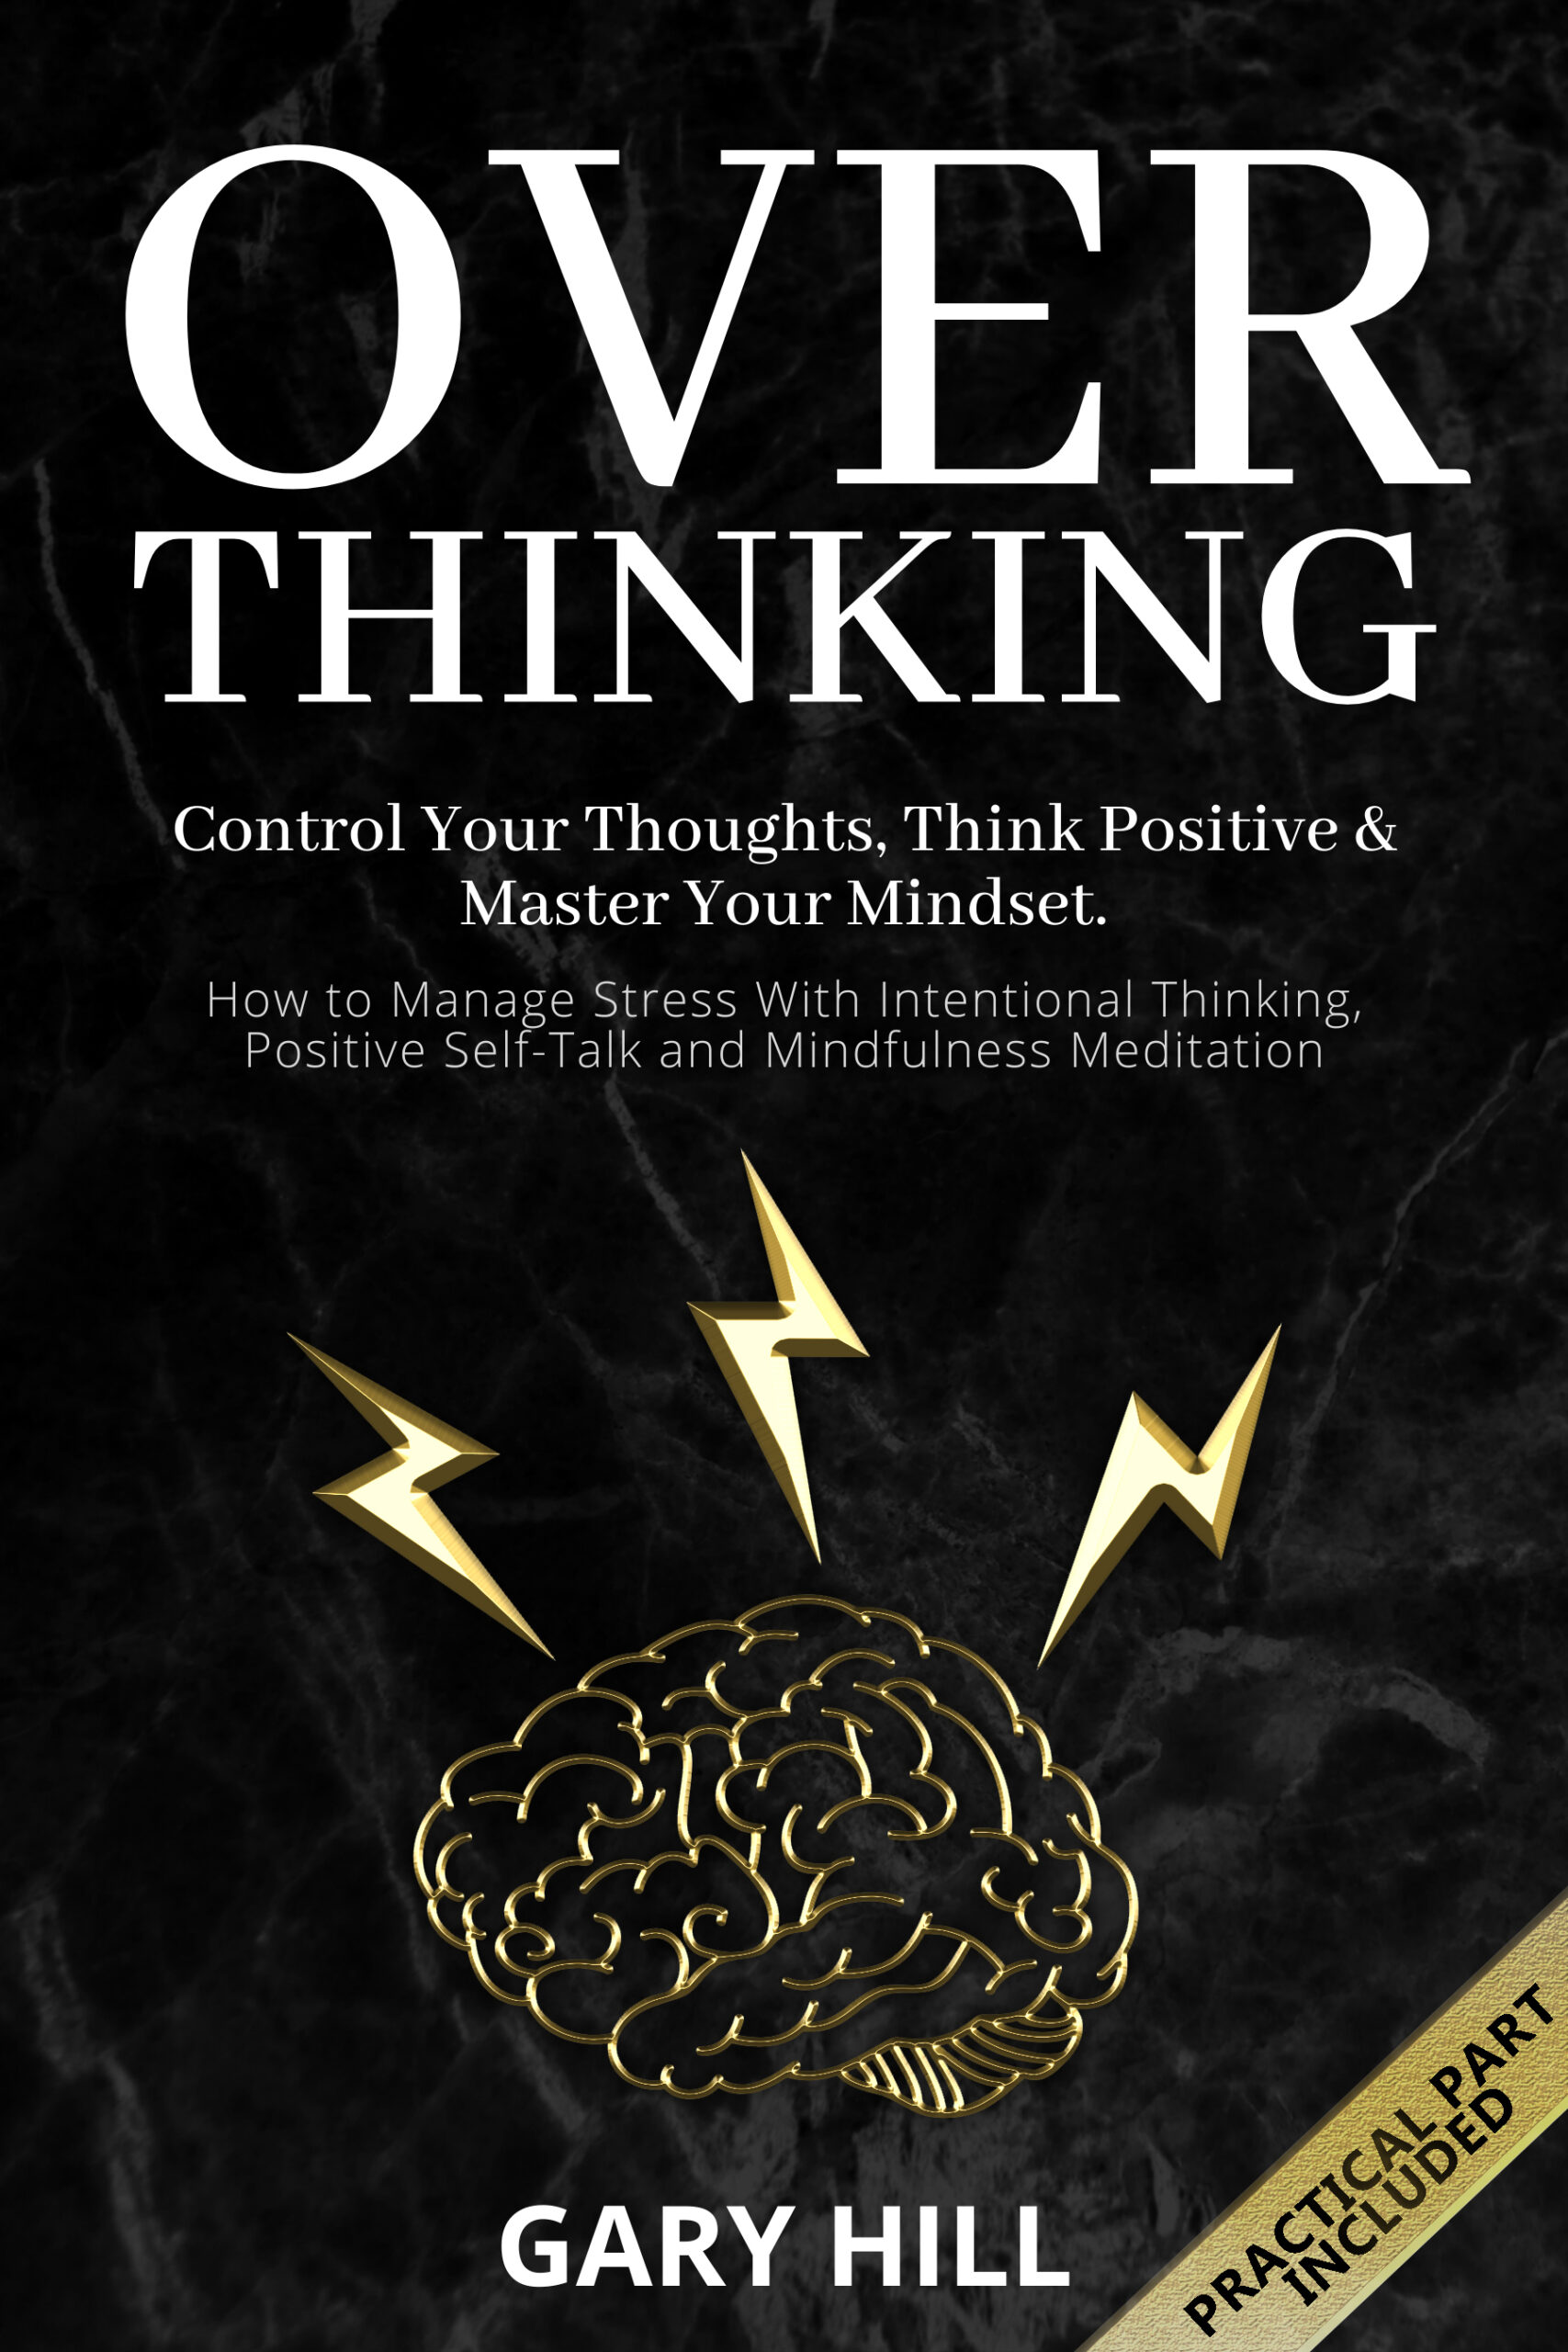 FREE: Overthinking: Control Your Thoughts, Think Positive & Master Your Mindset. How to Manage Stress With Intentional Thinking, Positive Self-Talk and Mindfulness Meditation by Gary Hill